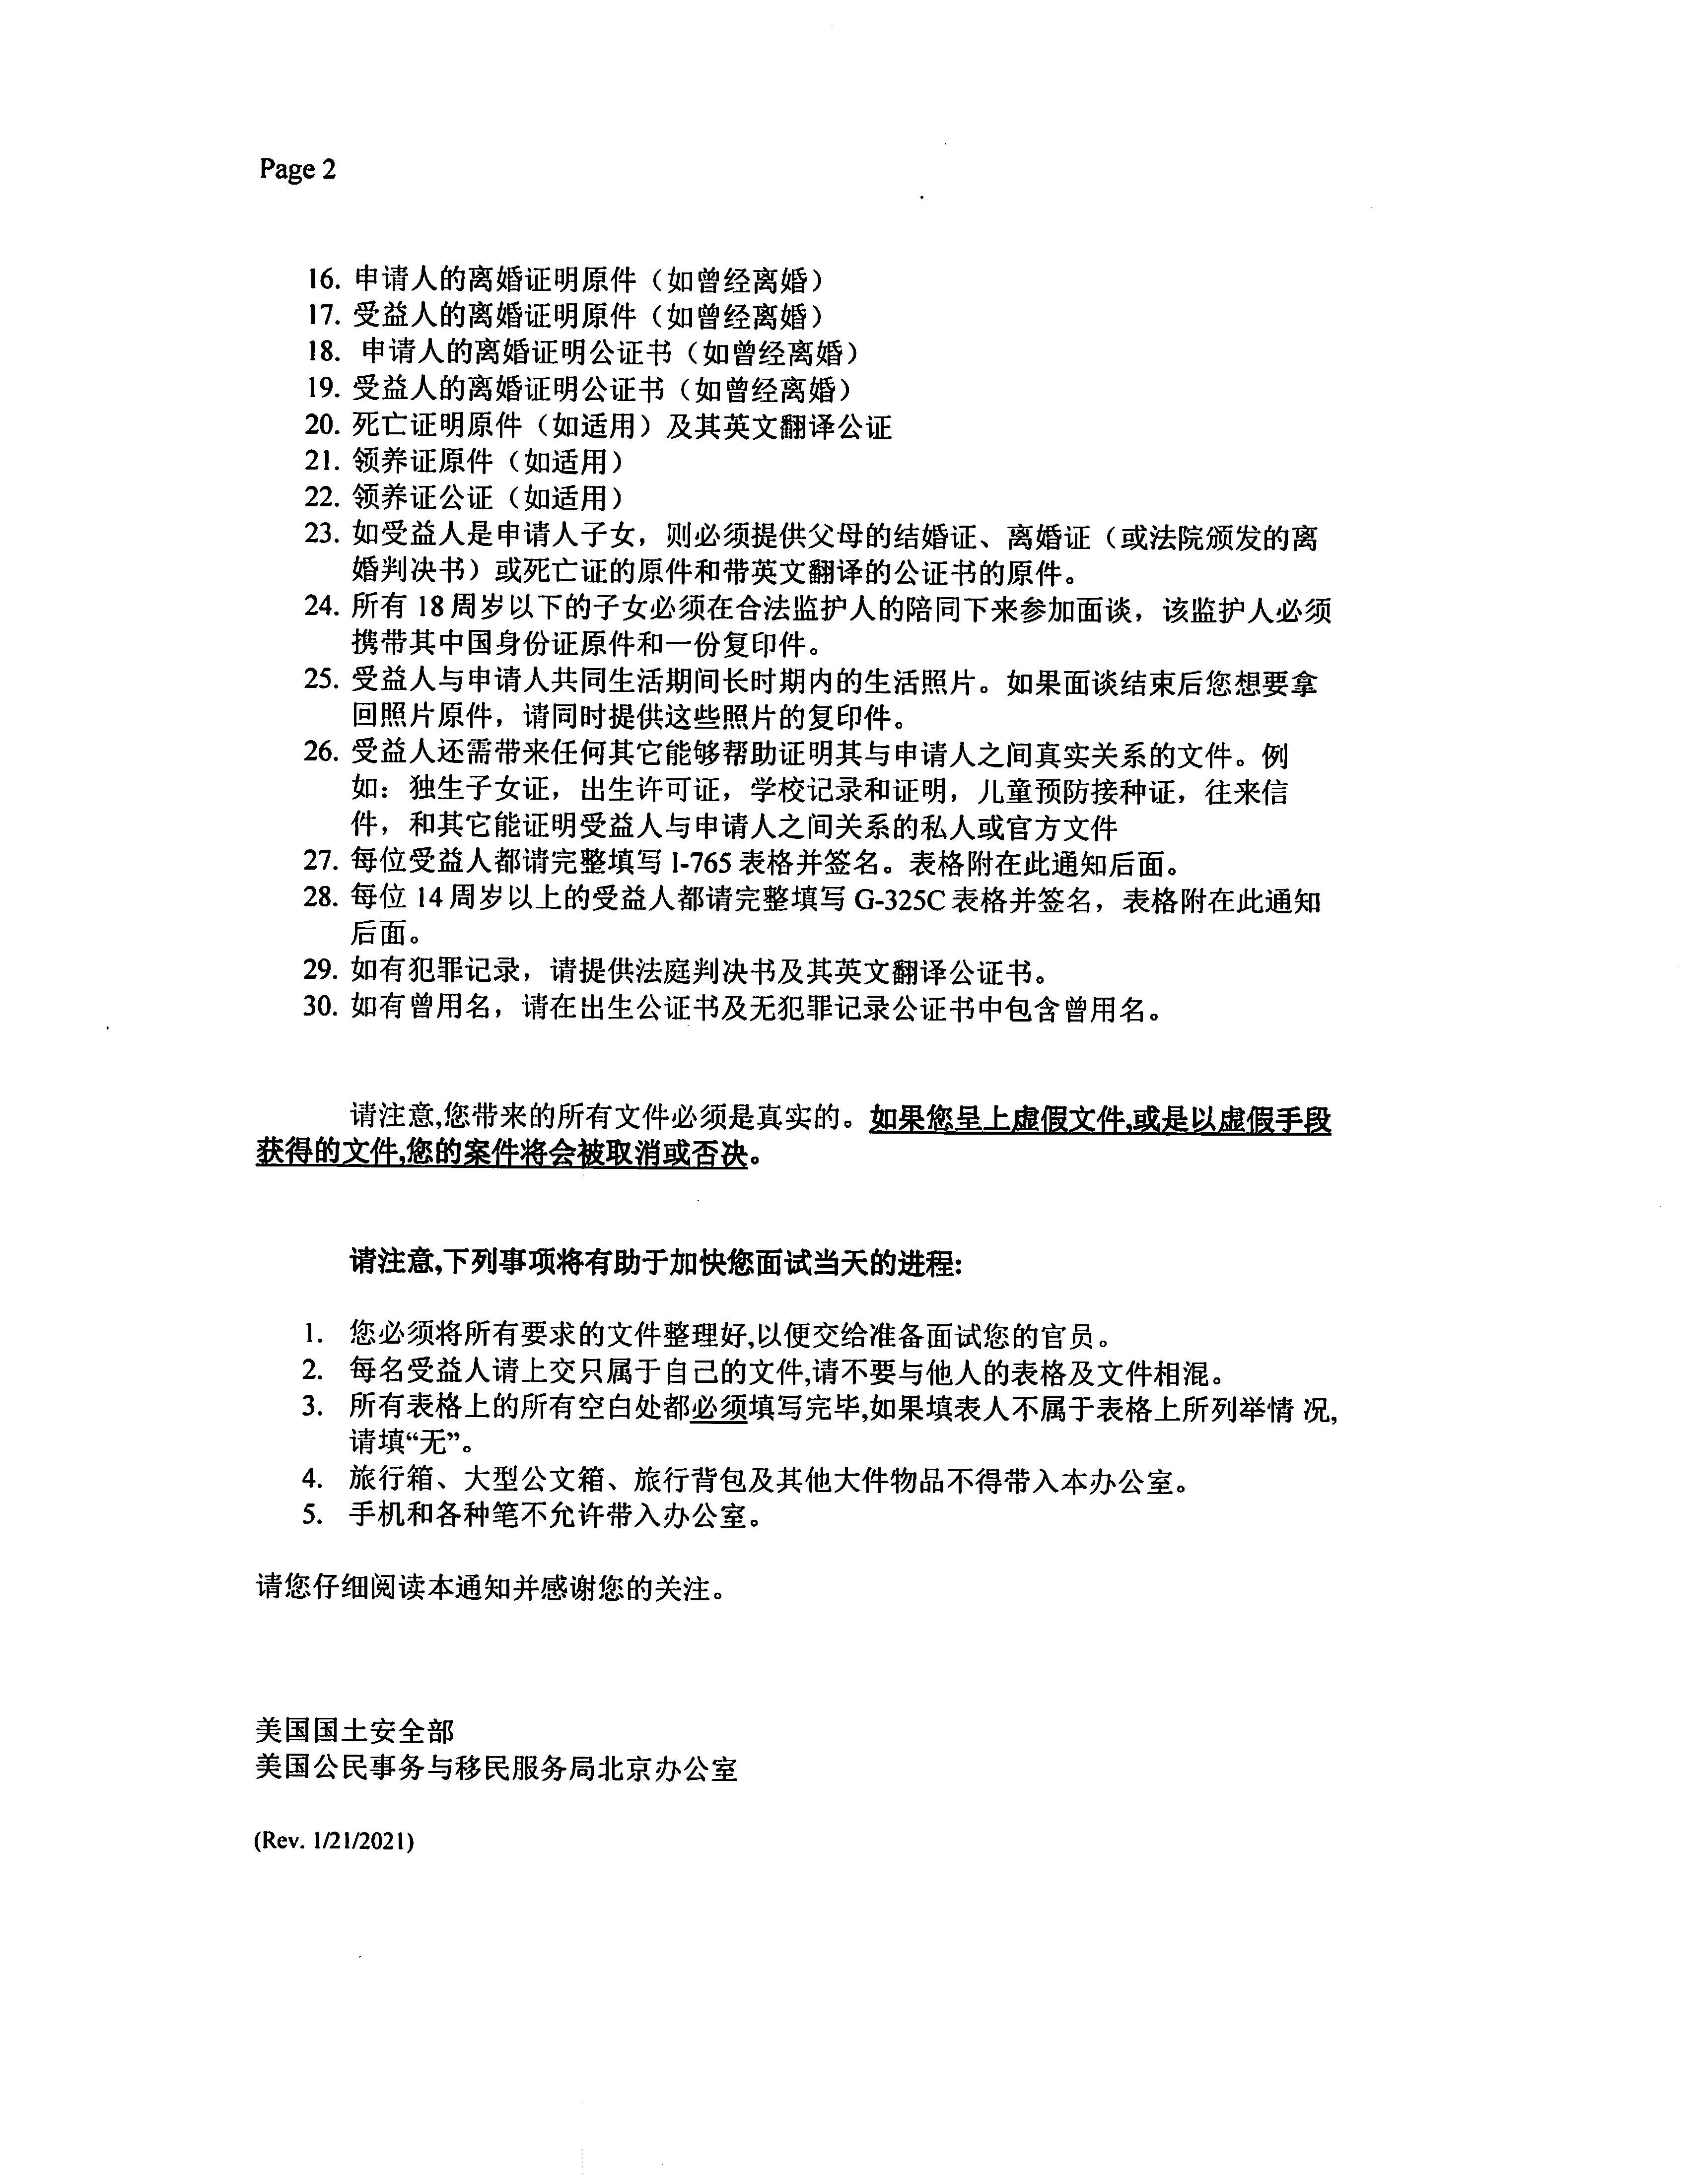 COVID-19 interview packet_页面_03.jpg